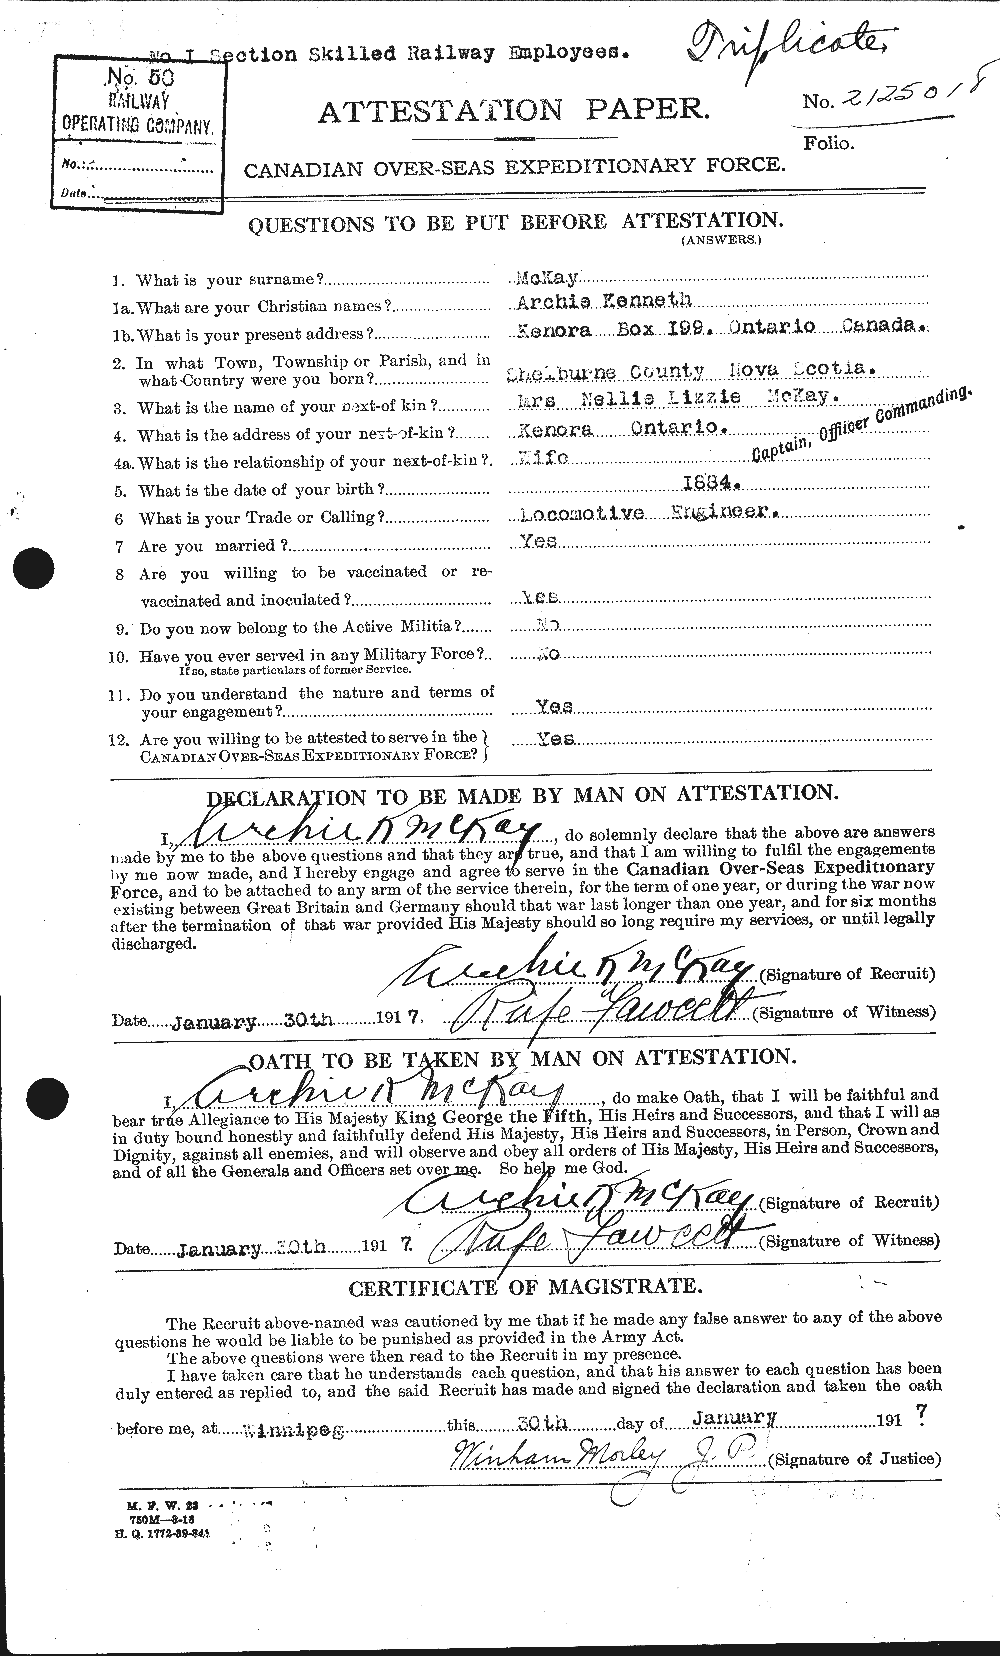 Personnel Records of the First World War - CEF 531023a